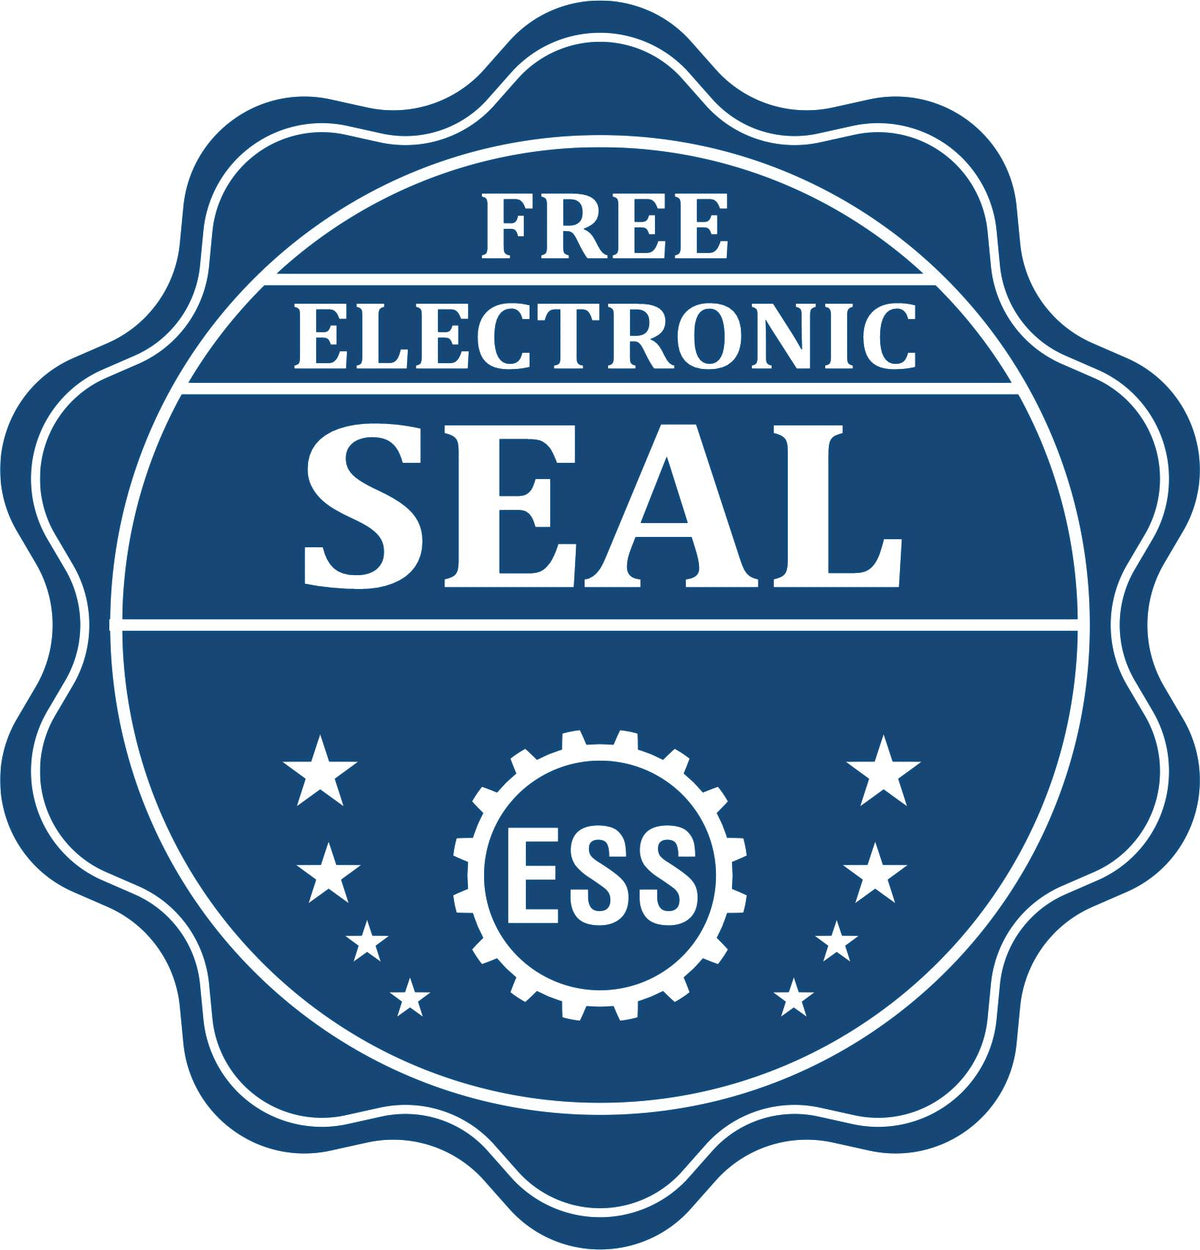 A badge showing a free electronic seal for the Gift New York Engineer Seal with stars and the ESS gear on the emblem.